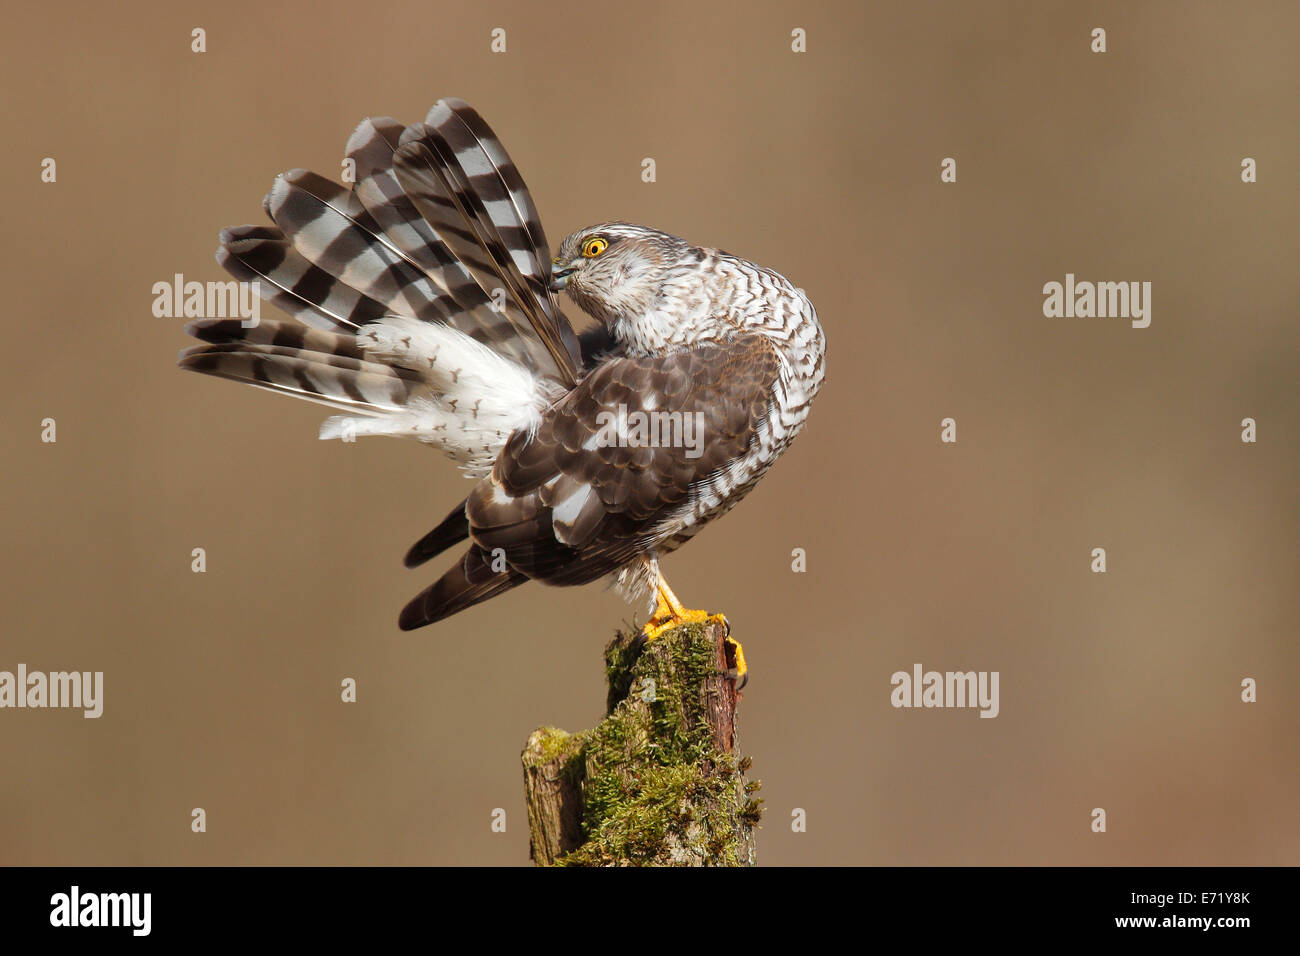 Eurasian Sparrow Hawk or Sparrowhawk (Accipiter nisus), female perched on a tree trunk arranging its feathers Stock Photo